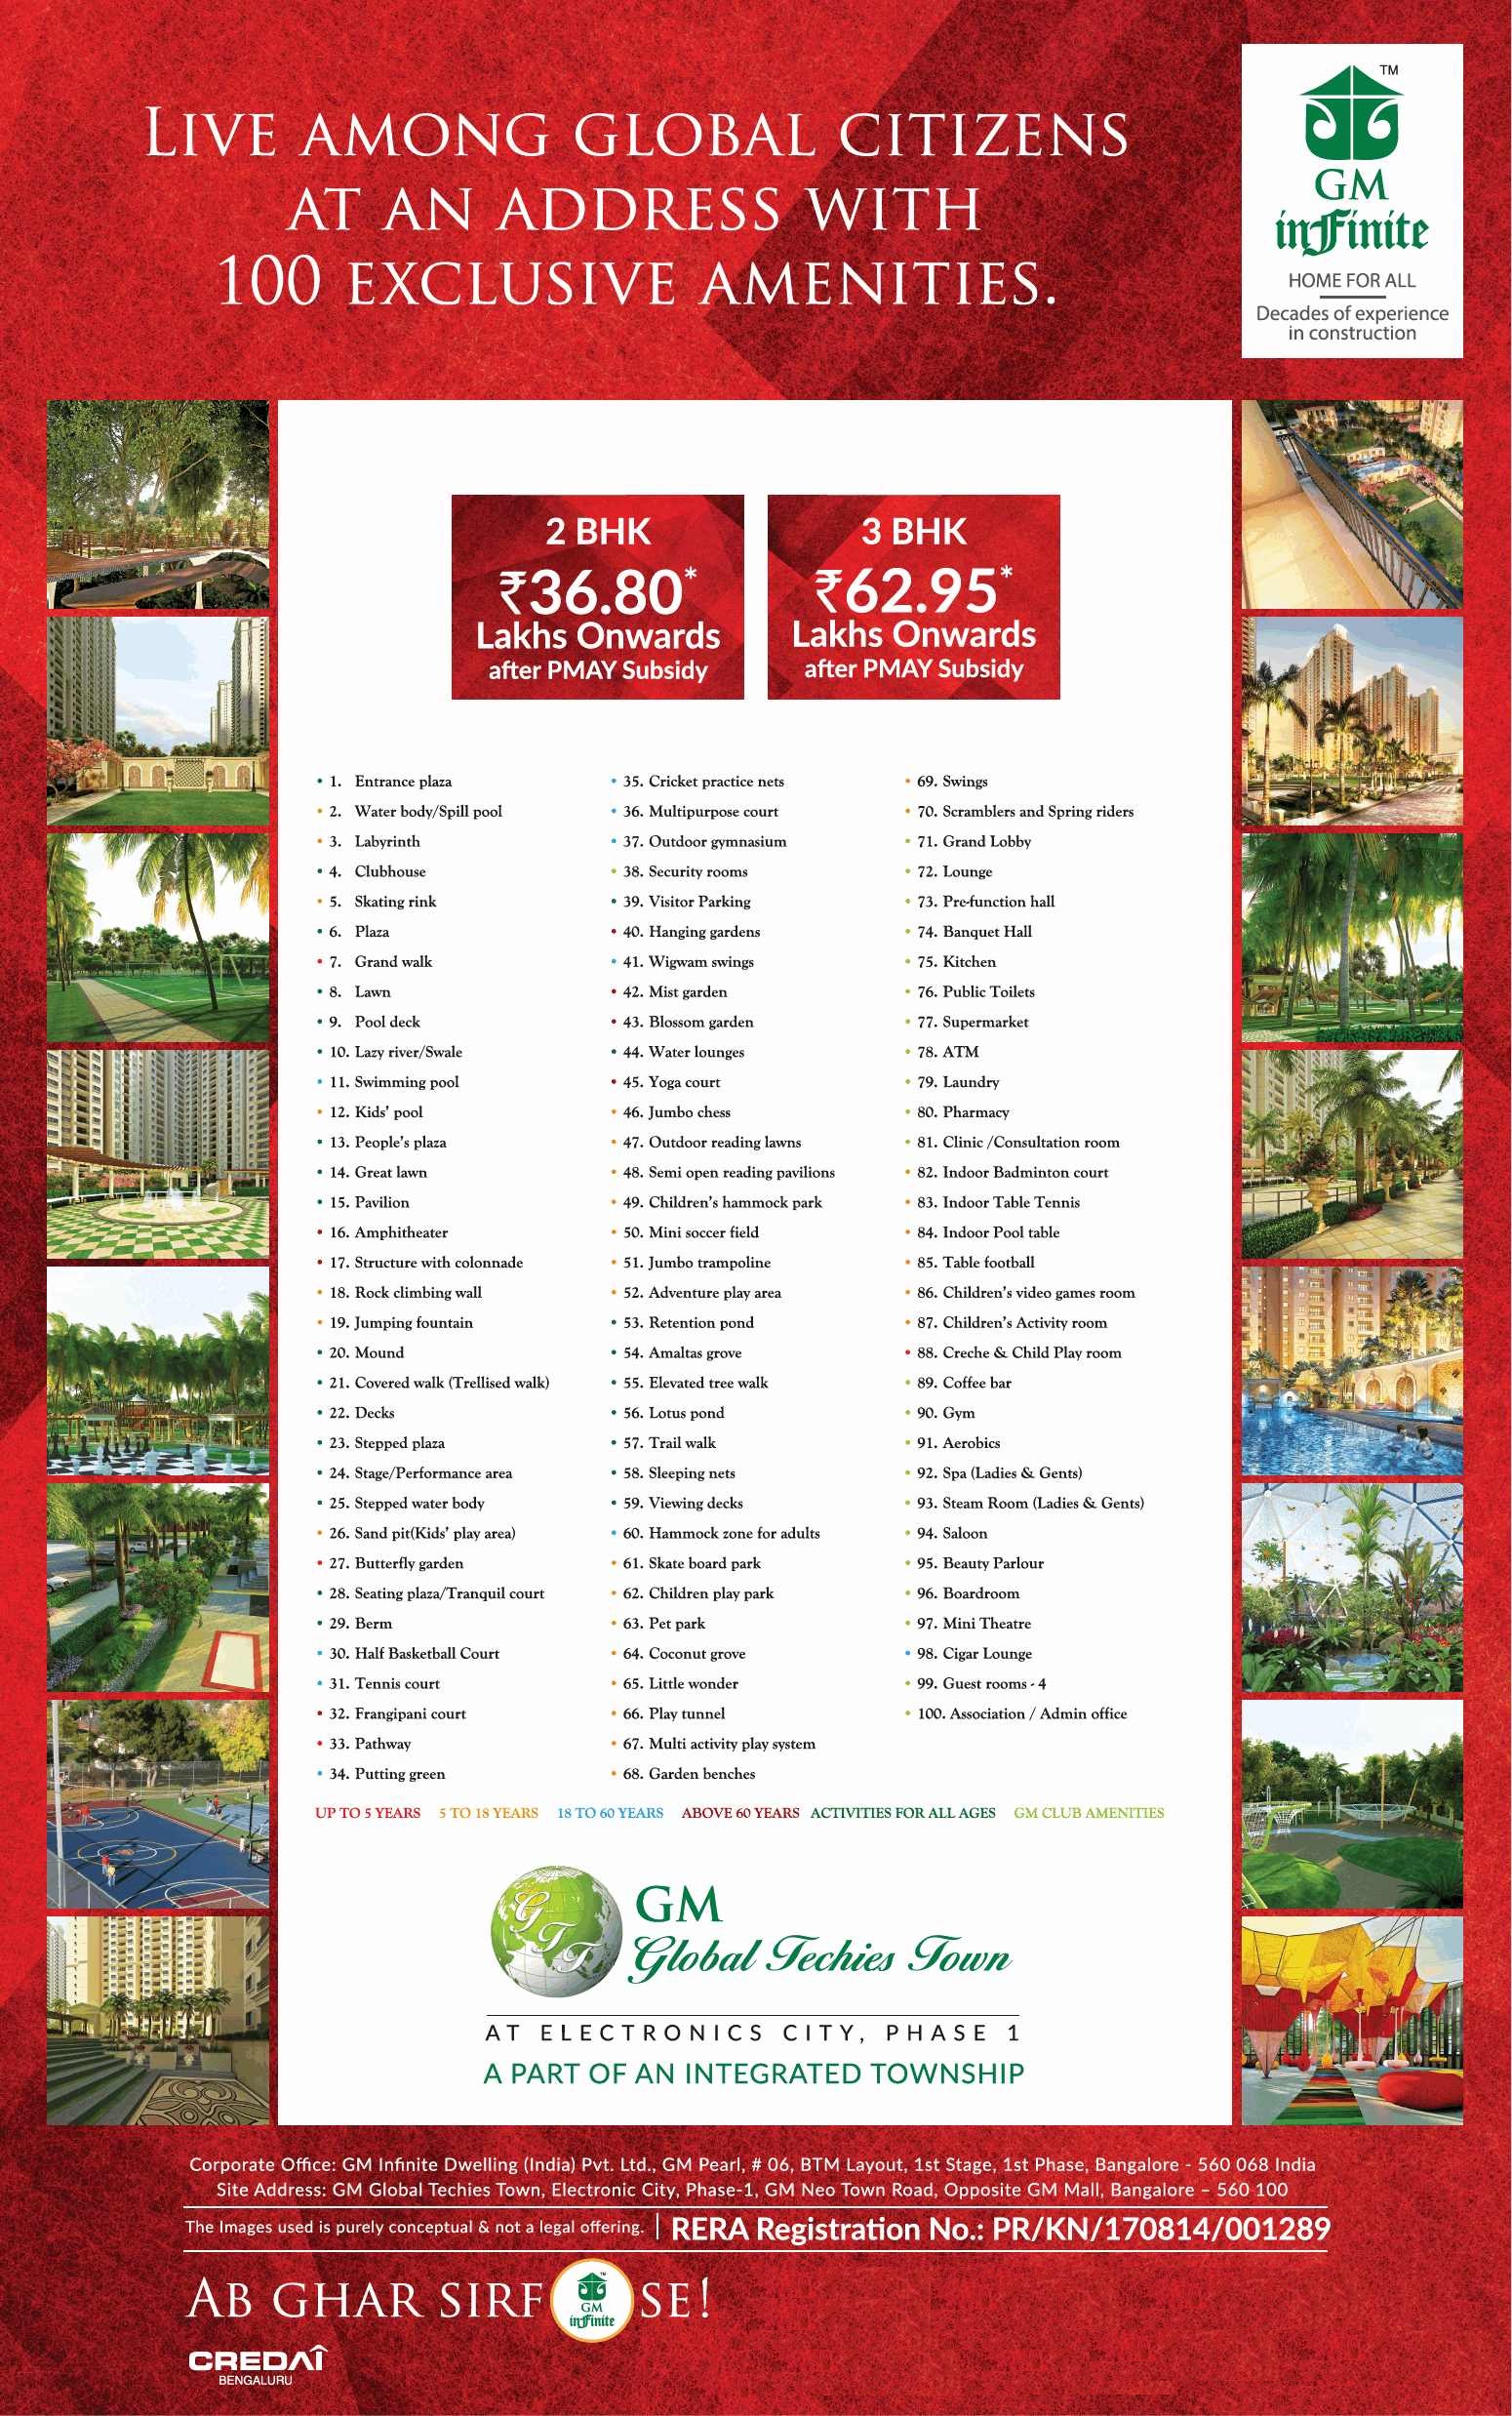 GM Global Techies Town launching apartments with 100 exclusive amenities in Bangalore